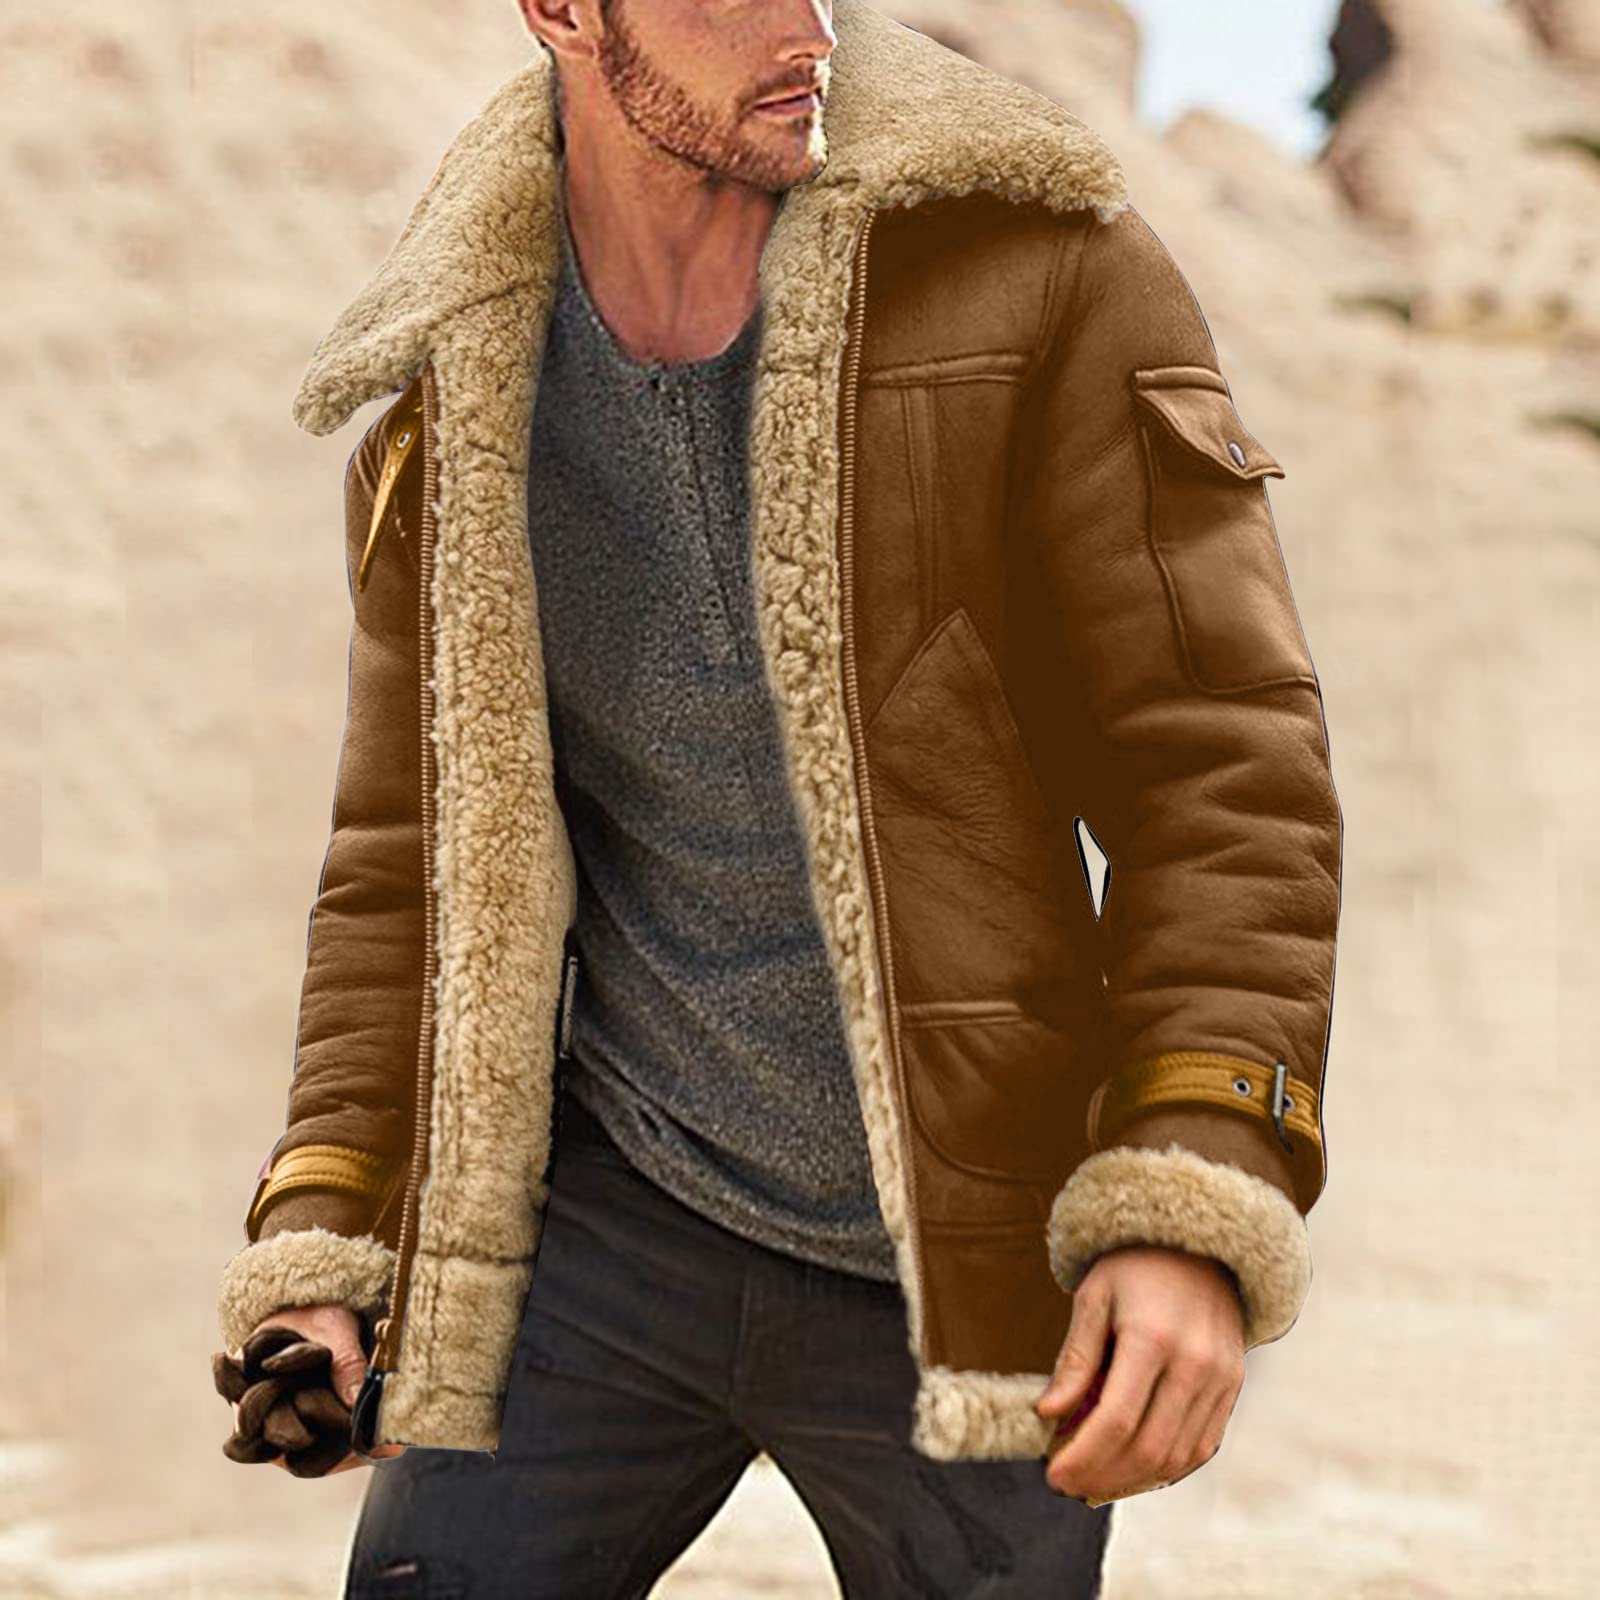 Men's sherpa lined jacket. When the temperature drops and the chilly winds start to blow, nothing beats the cozy comfort of a men's sherpa lined jacket.